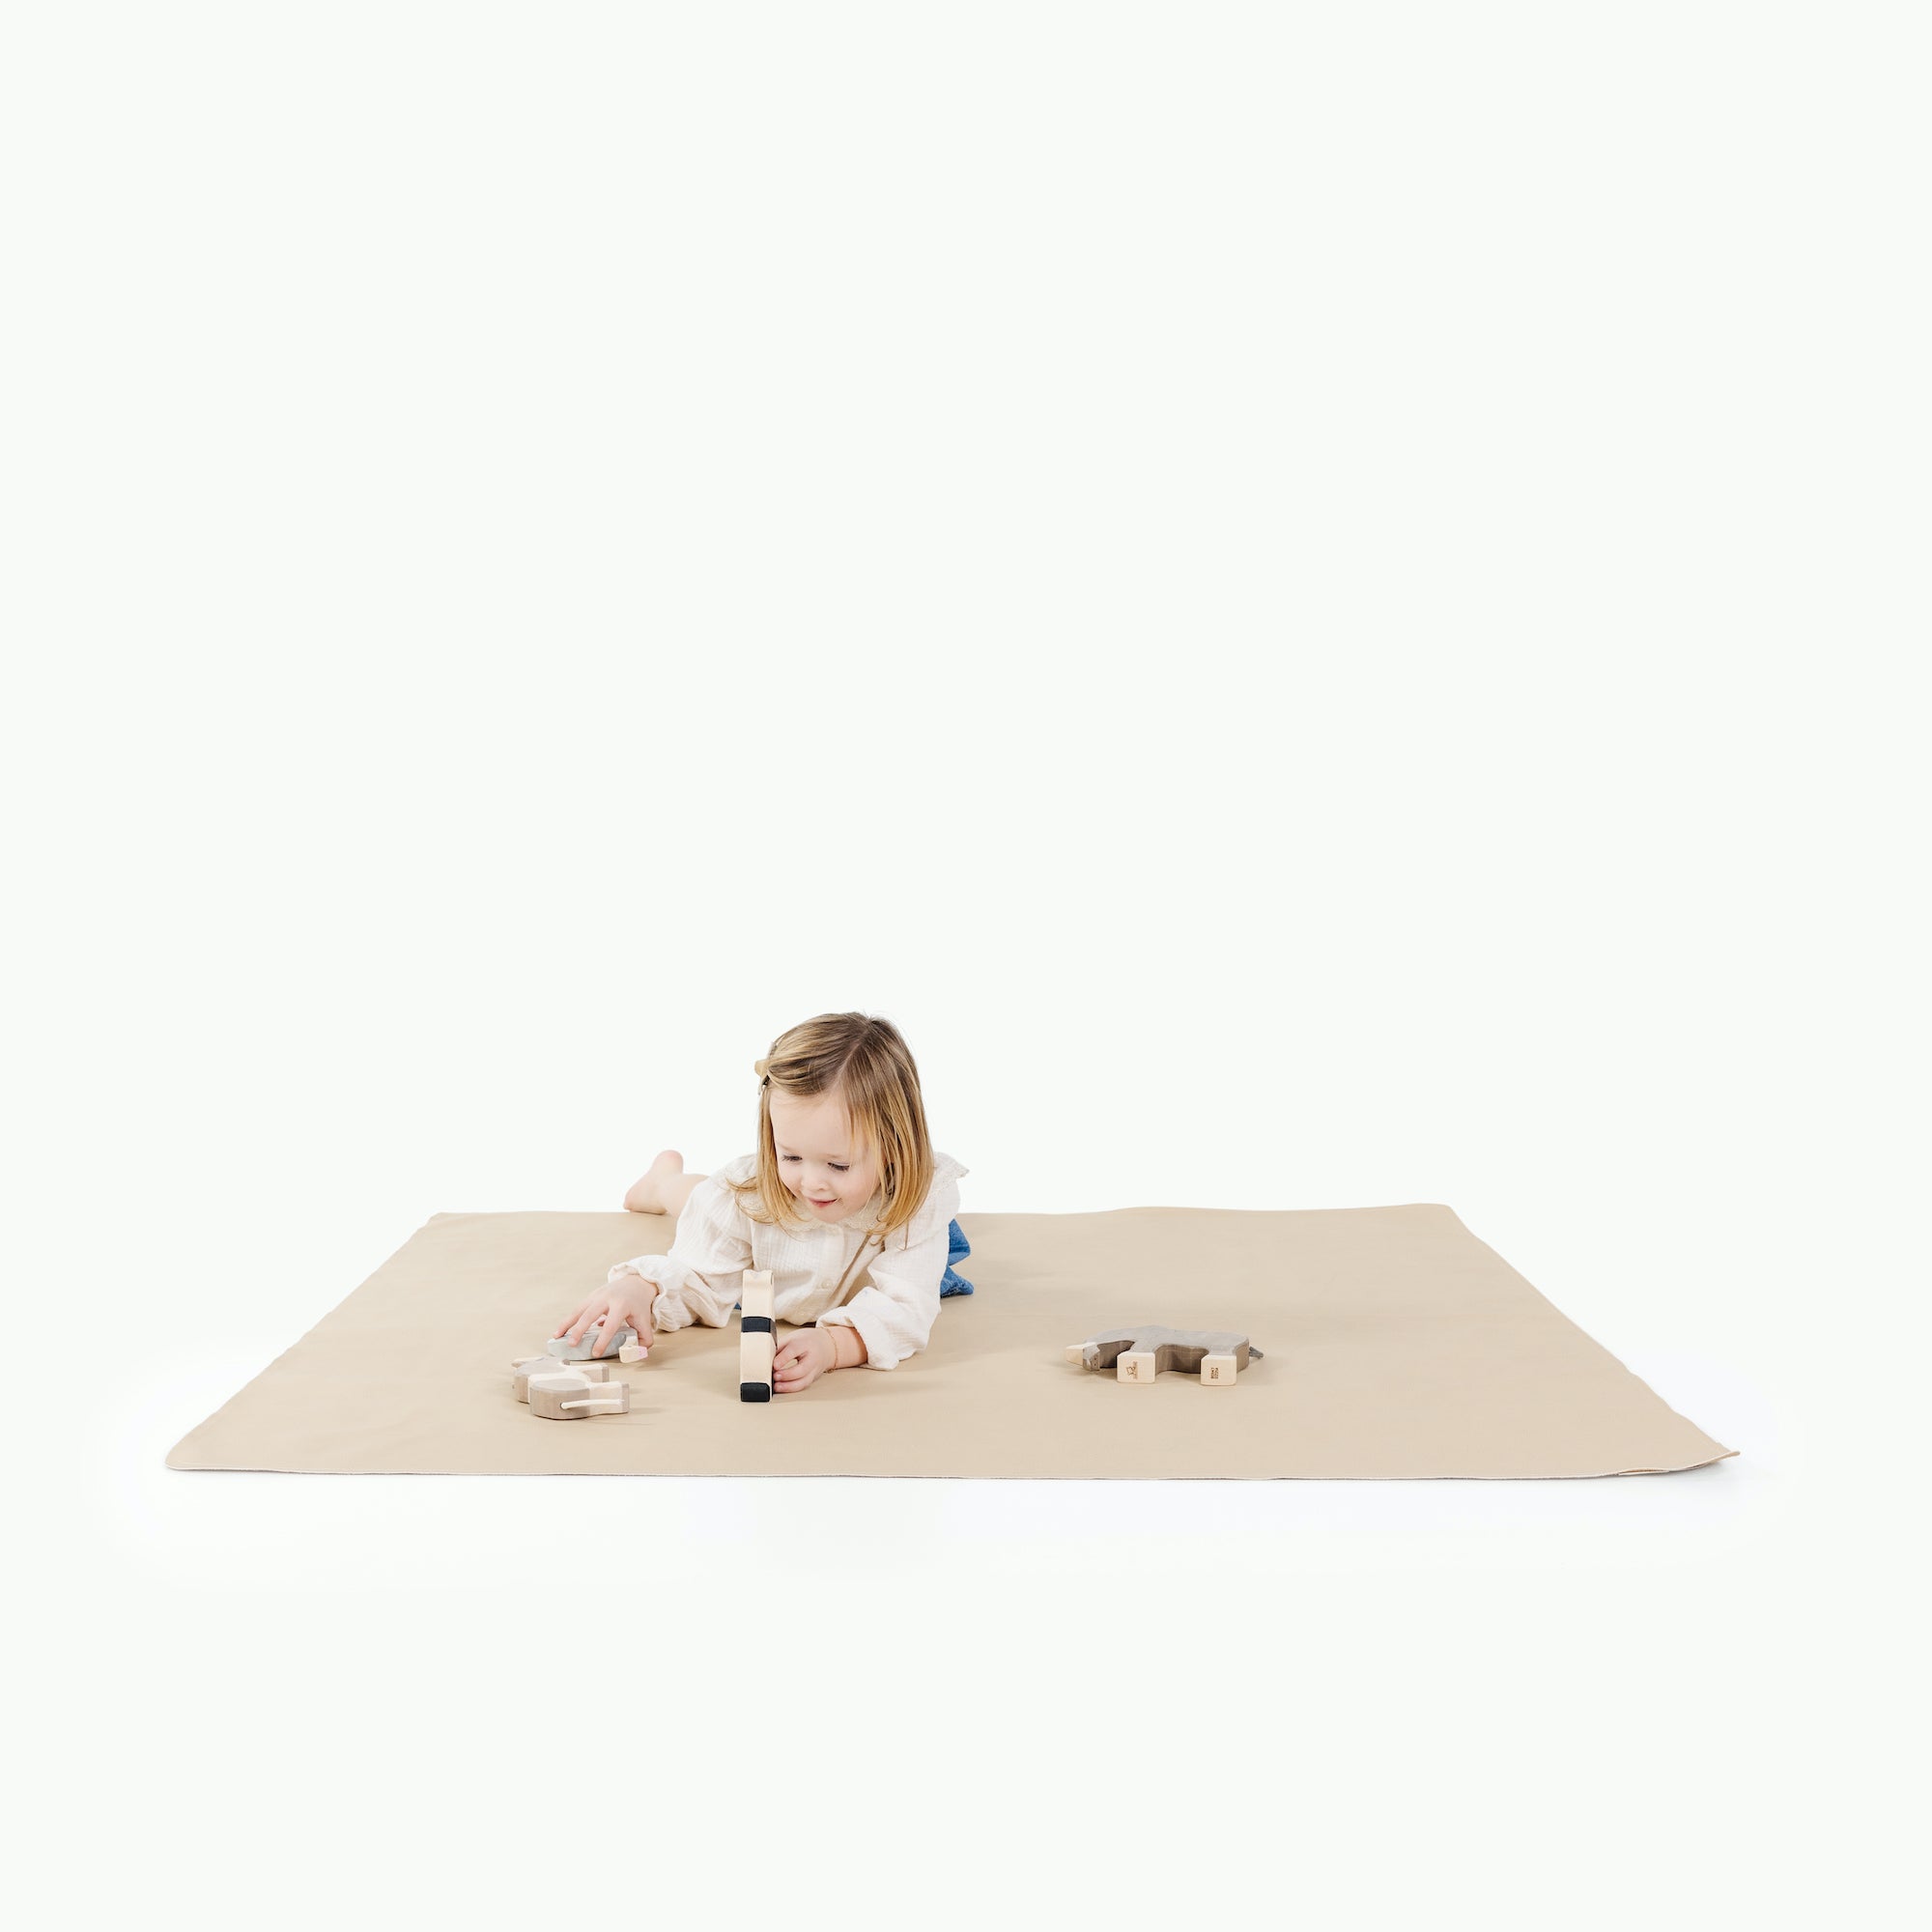 Créme / Square@girl playing on mat